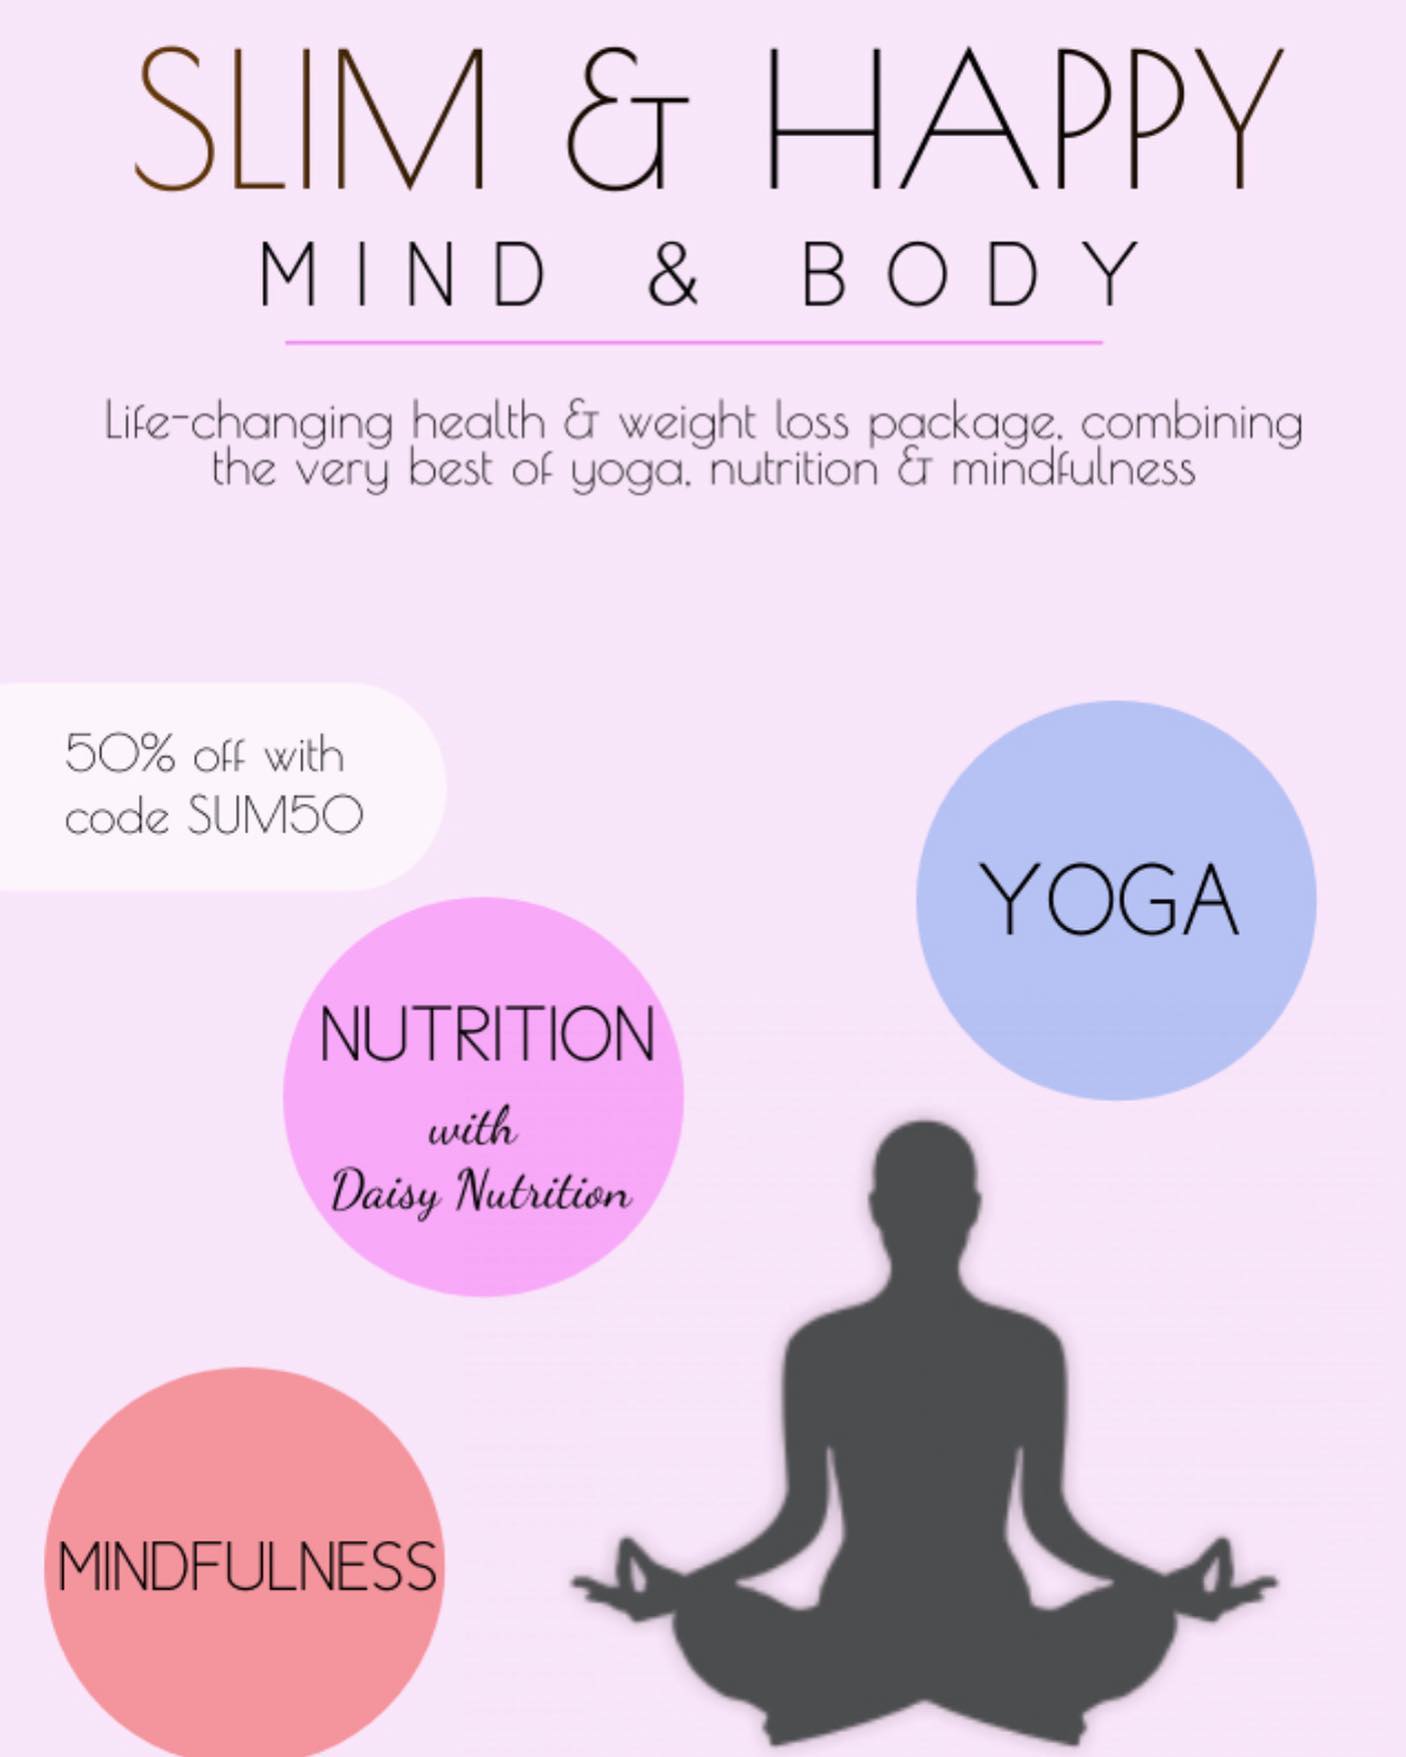 Announcing the launch of SLIM & HAPPY. The second of our 2 life-changing packages with WEIGHT LOSS included along with all the other amazing physical and mental health benefits. A truly HOLISTIC package combining nutrition, yoga and mindfulness. Developed with my husband and yoga guru @pandeyjideepak. If Lockdown has taken its toll on your physical and/or mental health and led to weight gain, this could be just what you need...For more information please visit anandyogaashram.org/buy-health #healthylifestyle #healthpackage #weightloss #getfit #yoga #mindfulness #gethealthy #recoverfromlockdown #healthyfood #health #healthy #nutrition #nutritionist #nutritionistapproved #eatforenergy #eathealthy #yogiclife #yogicfood #lifechanging